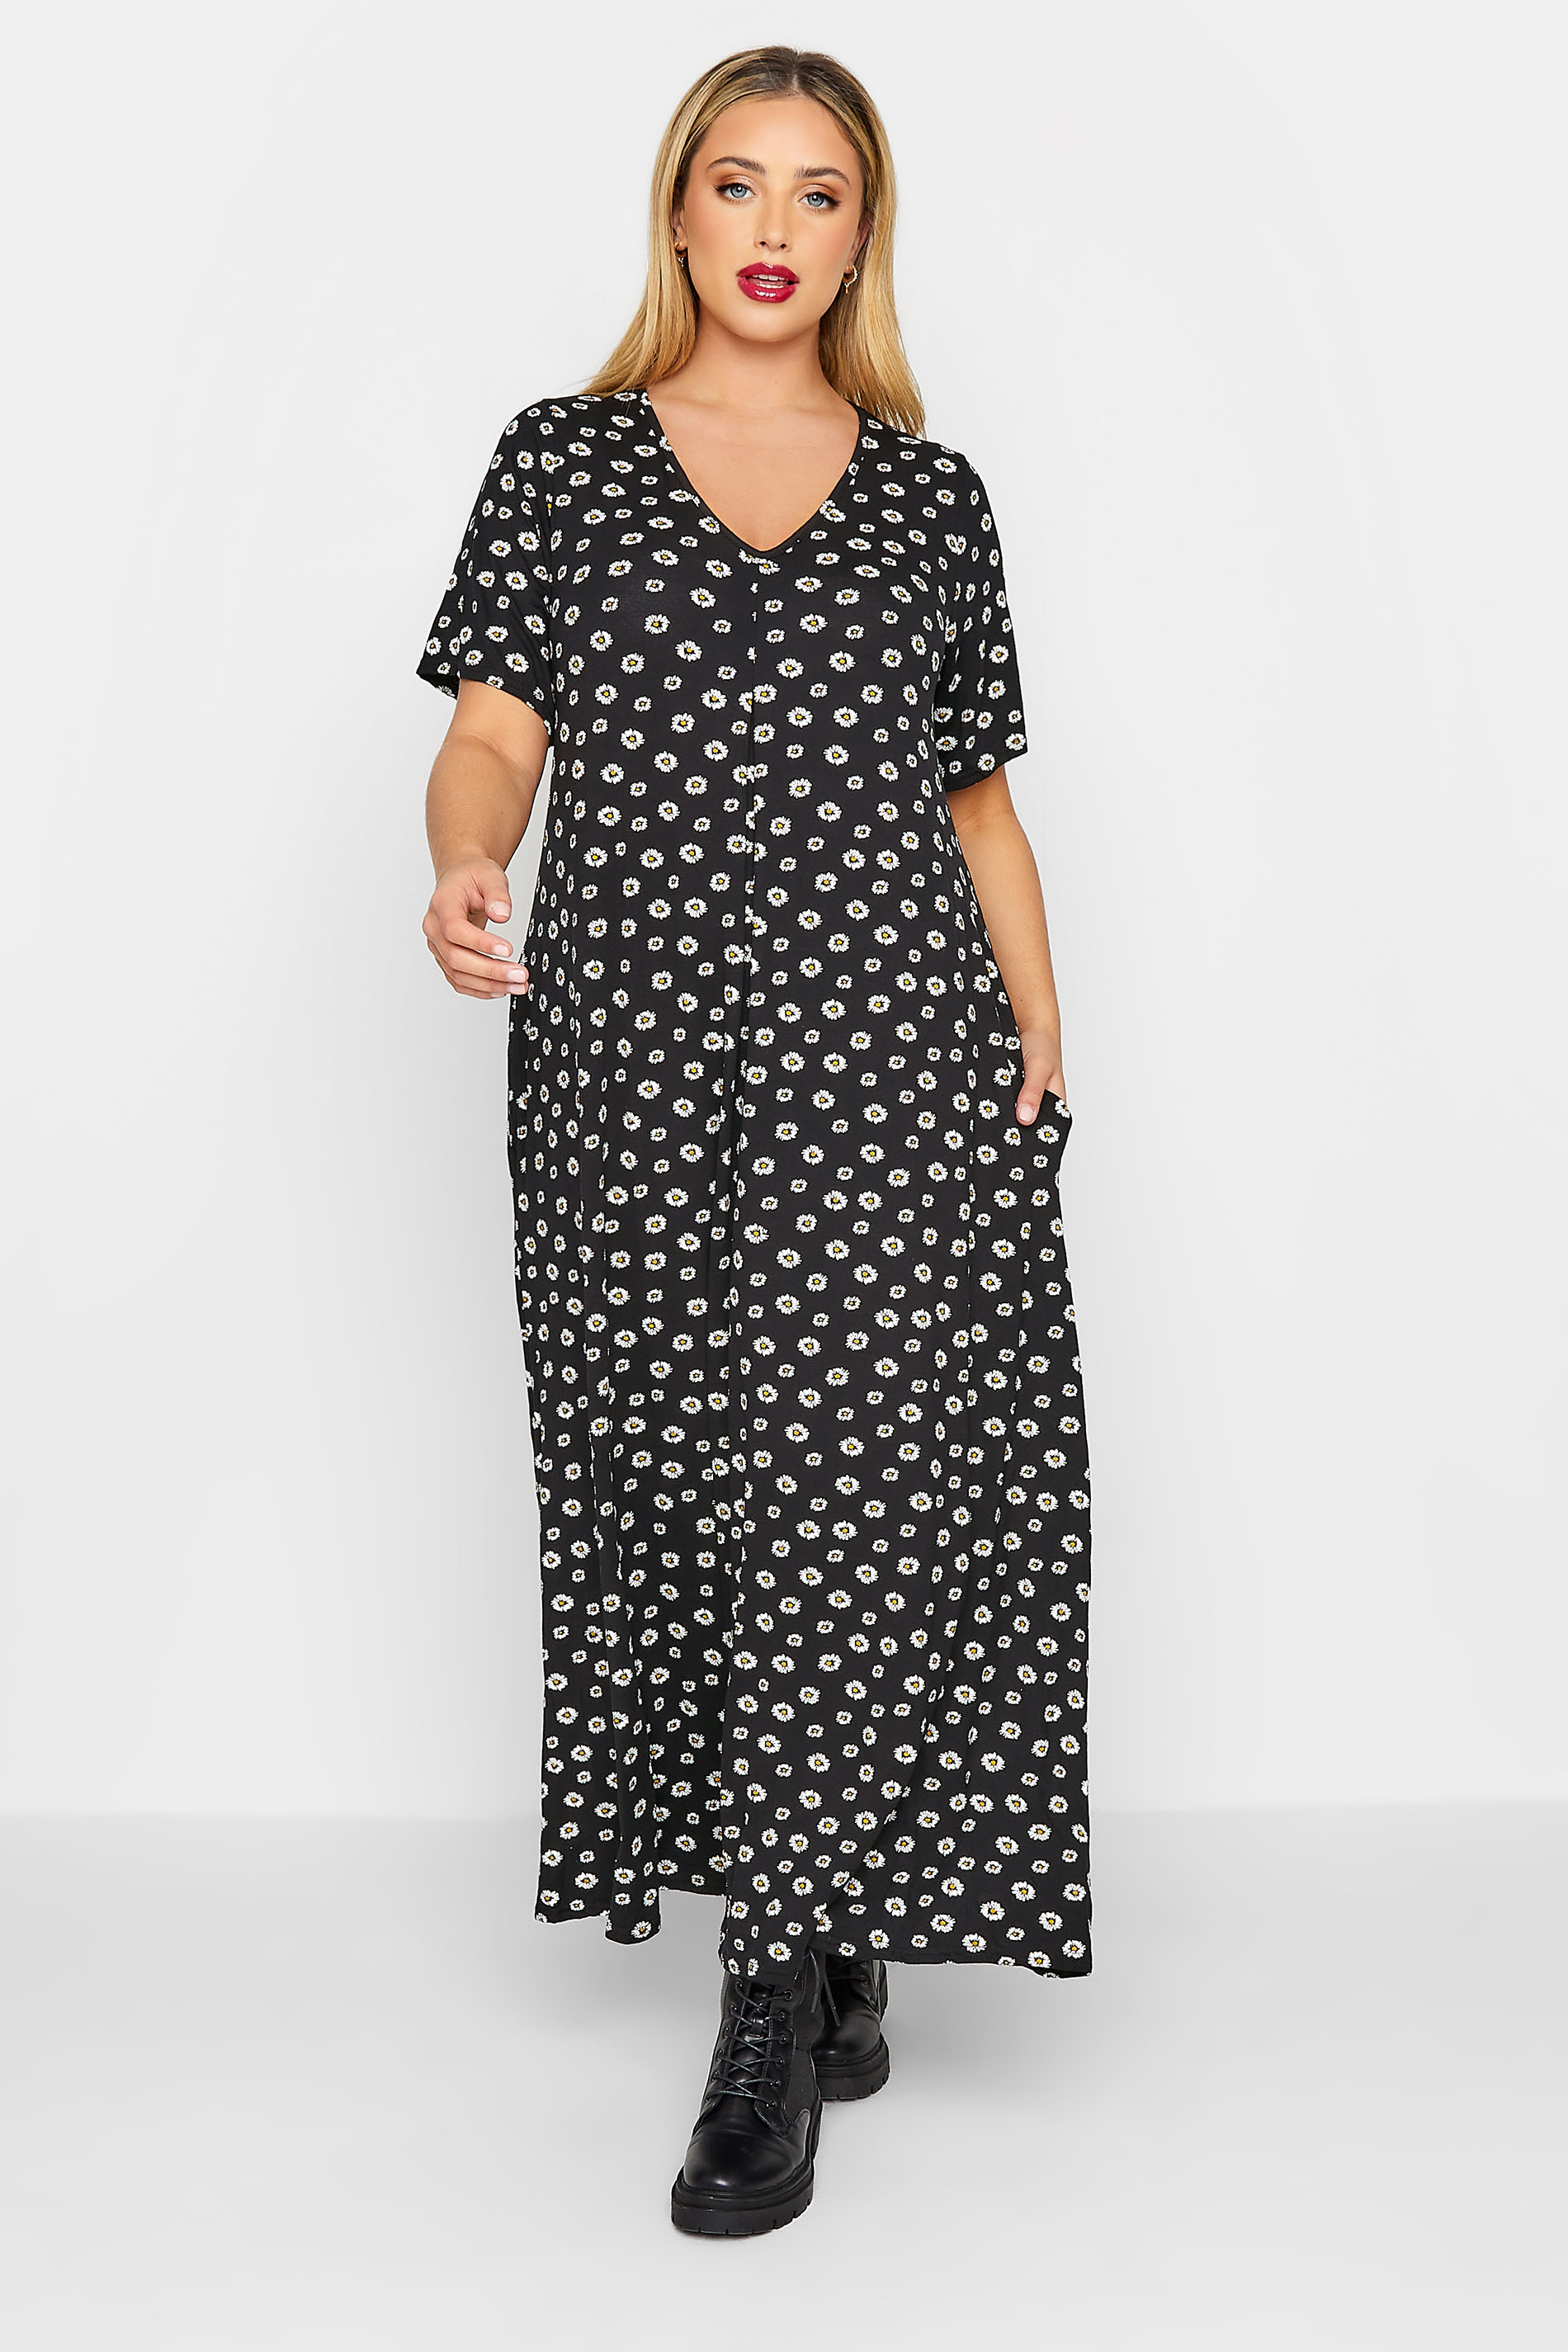 LIMITED COLLECTION Plus Size Black Daisy Pleat Front Maxi Dress | Yours Clothing  1